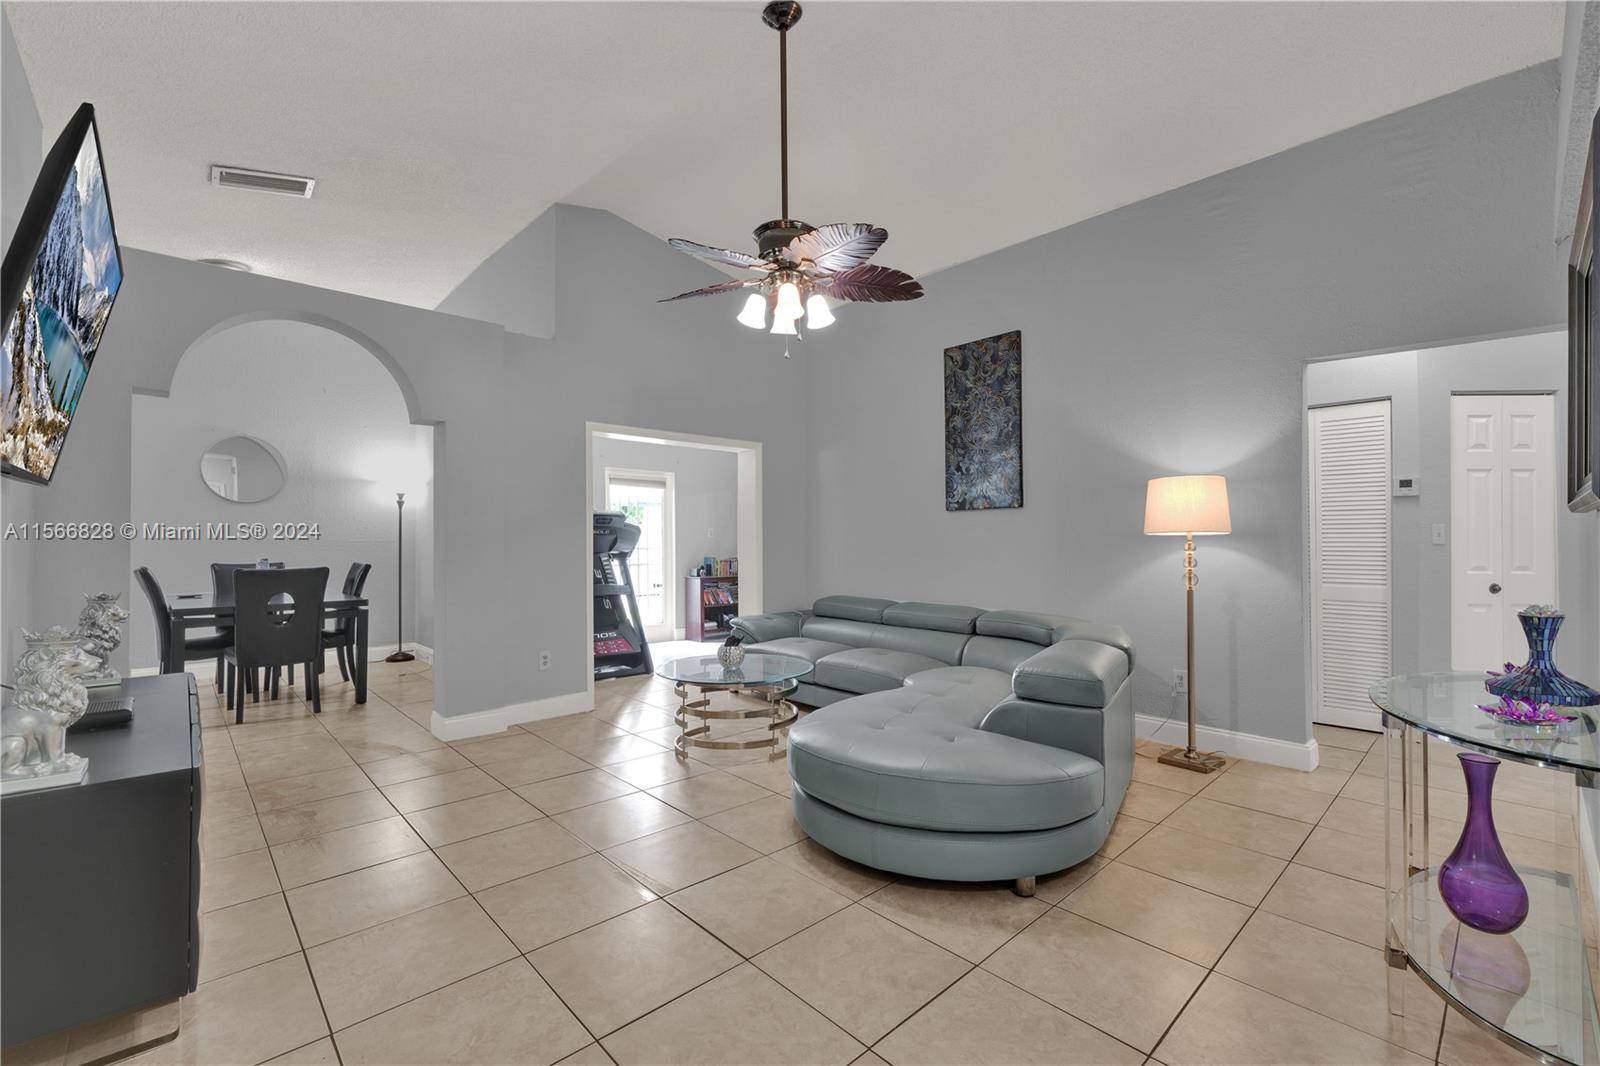 Enjoy living in a Resort Style family oriented gated community in the Sought After Sea Grape Community in Cutler Bay.